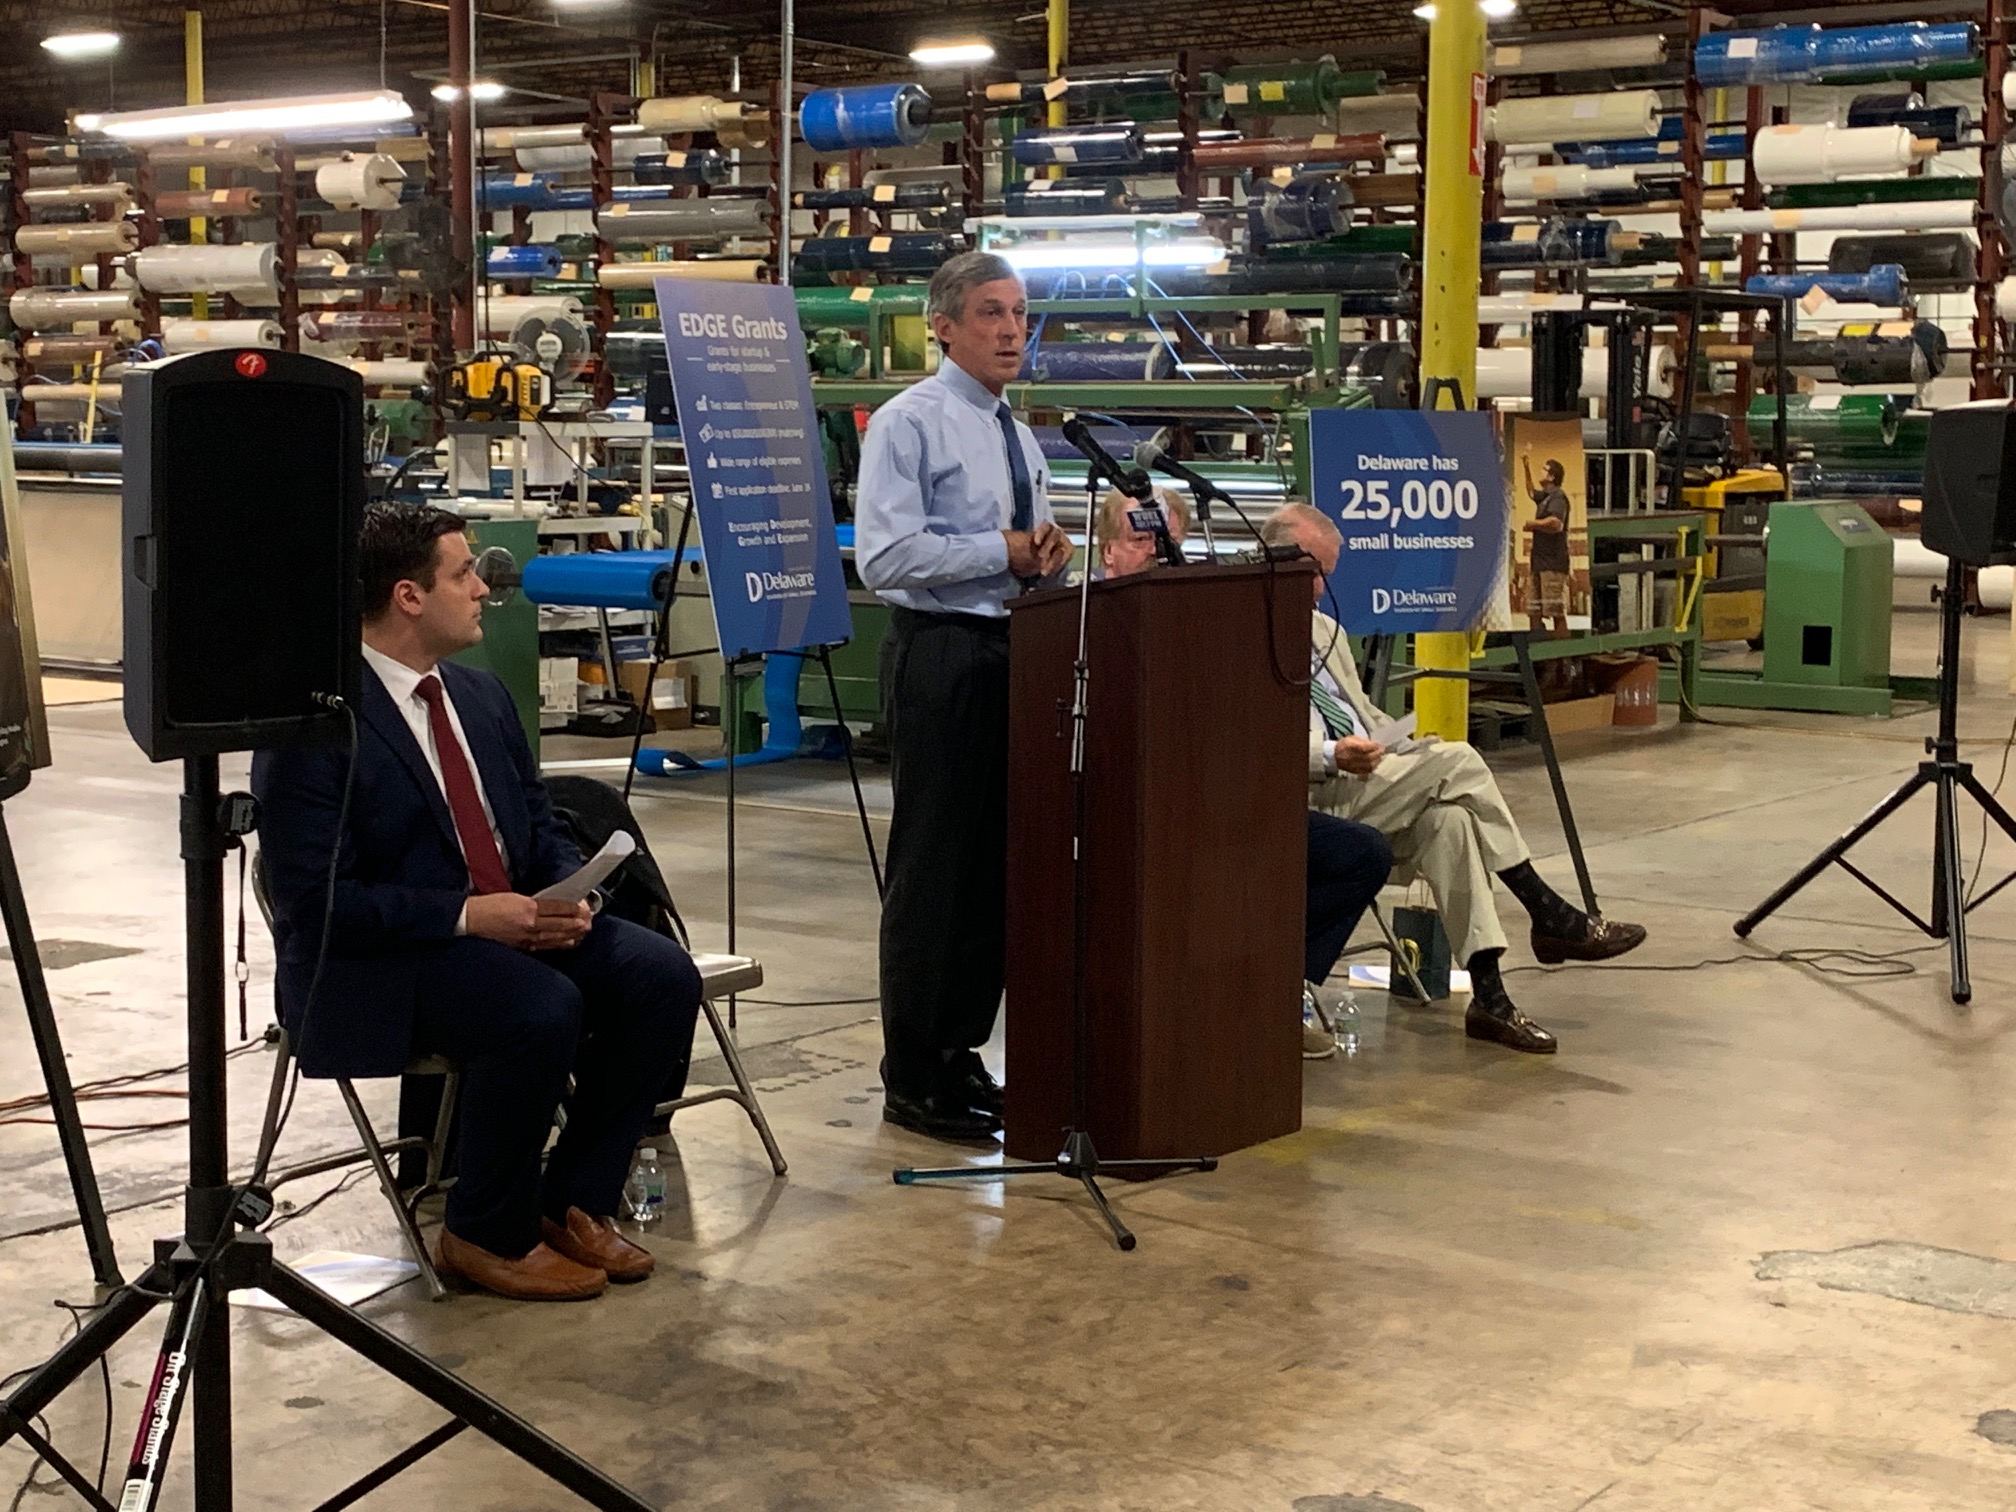 New Grant Program To Help Fuel The Growth Of Delaware Small